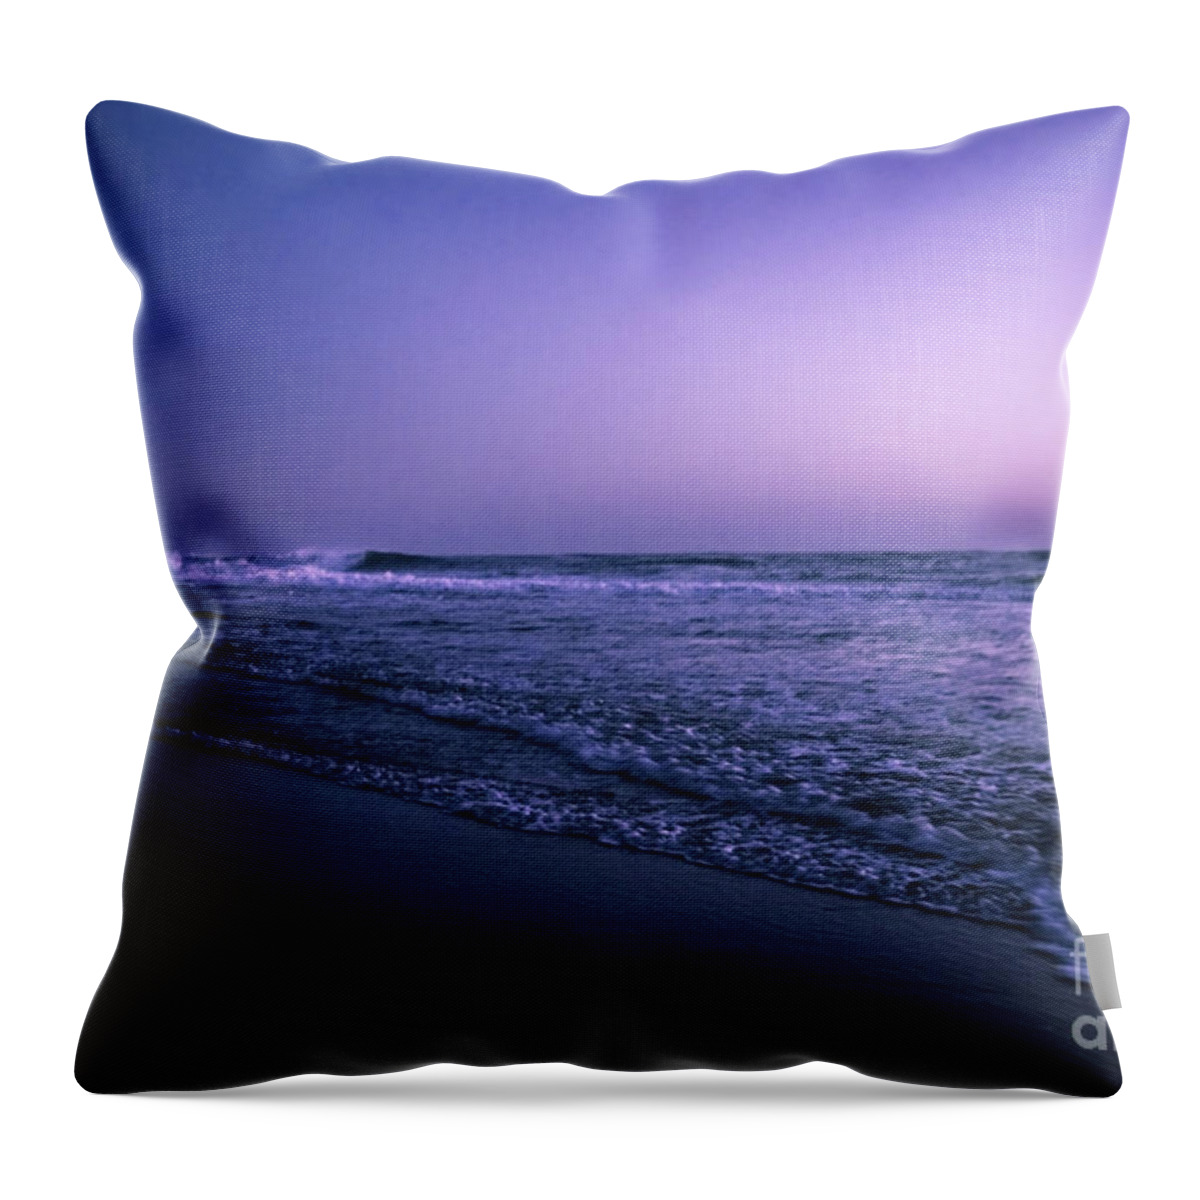 Europe Throw Pillow featuring the photograph Calm night at the ocean by Hannes Cmarits